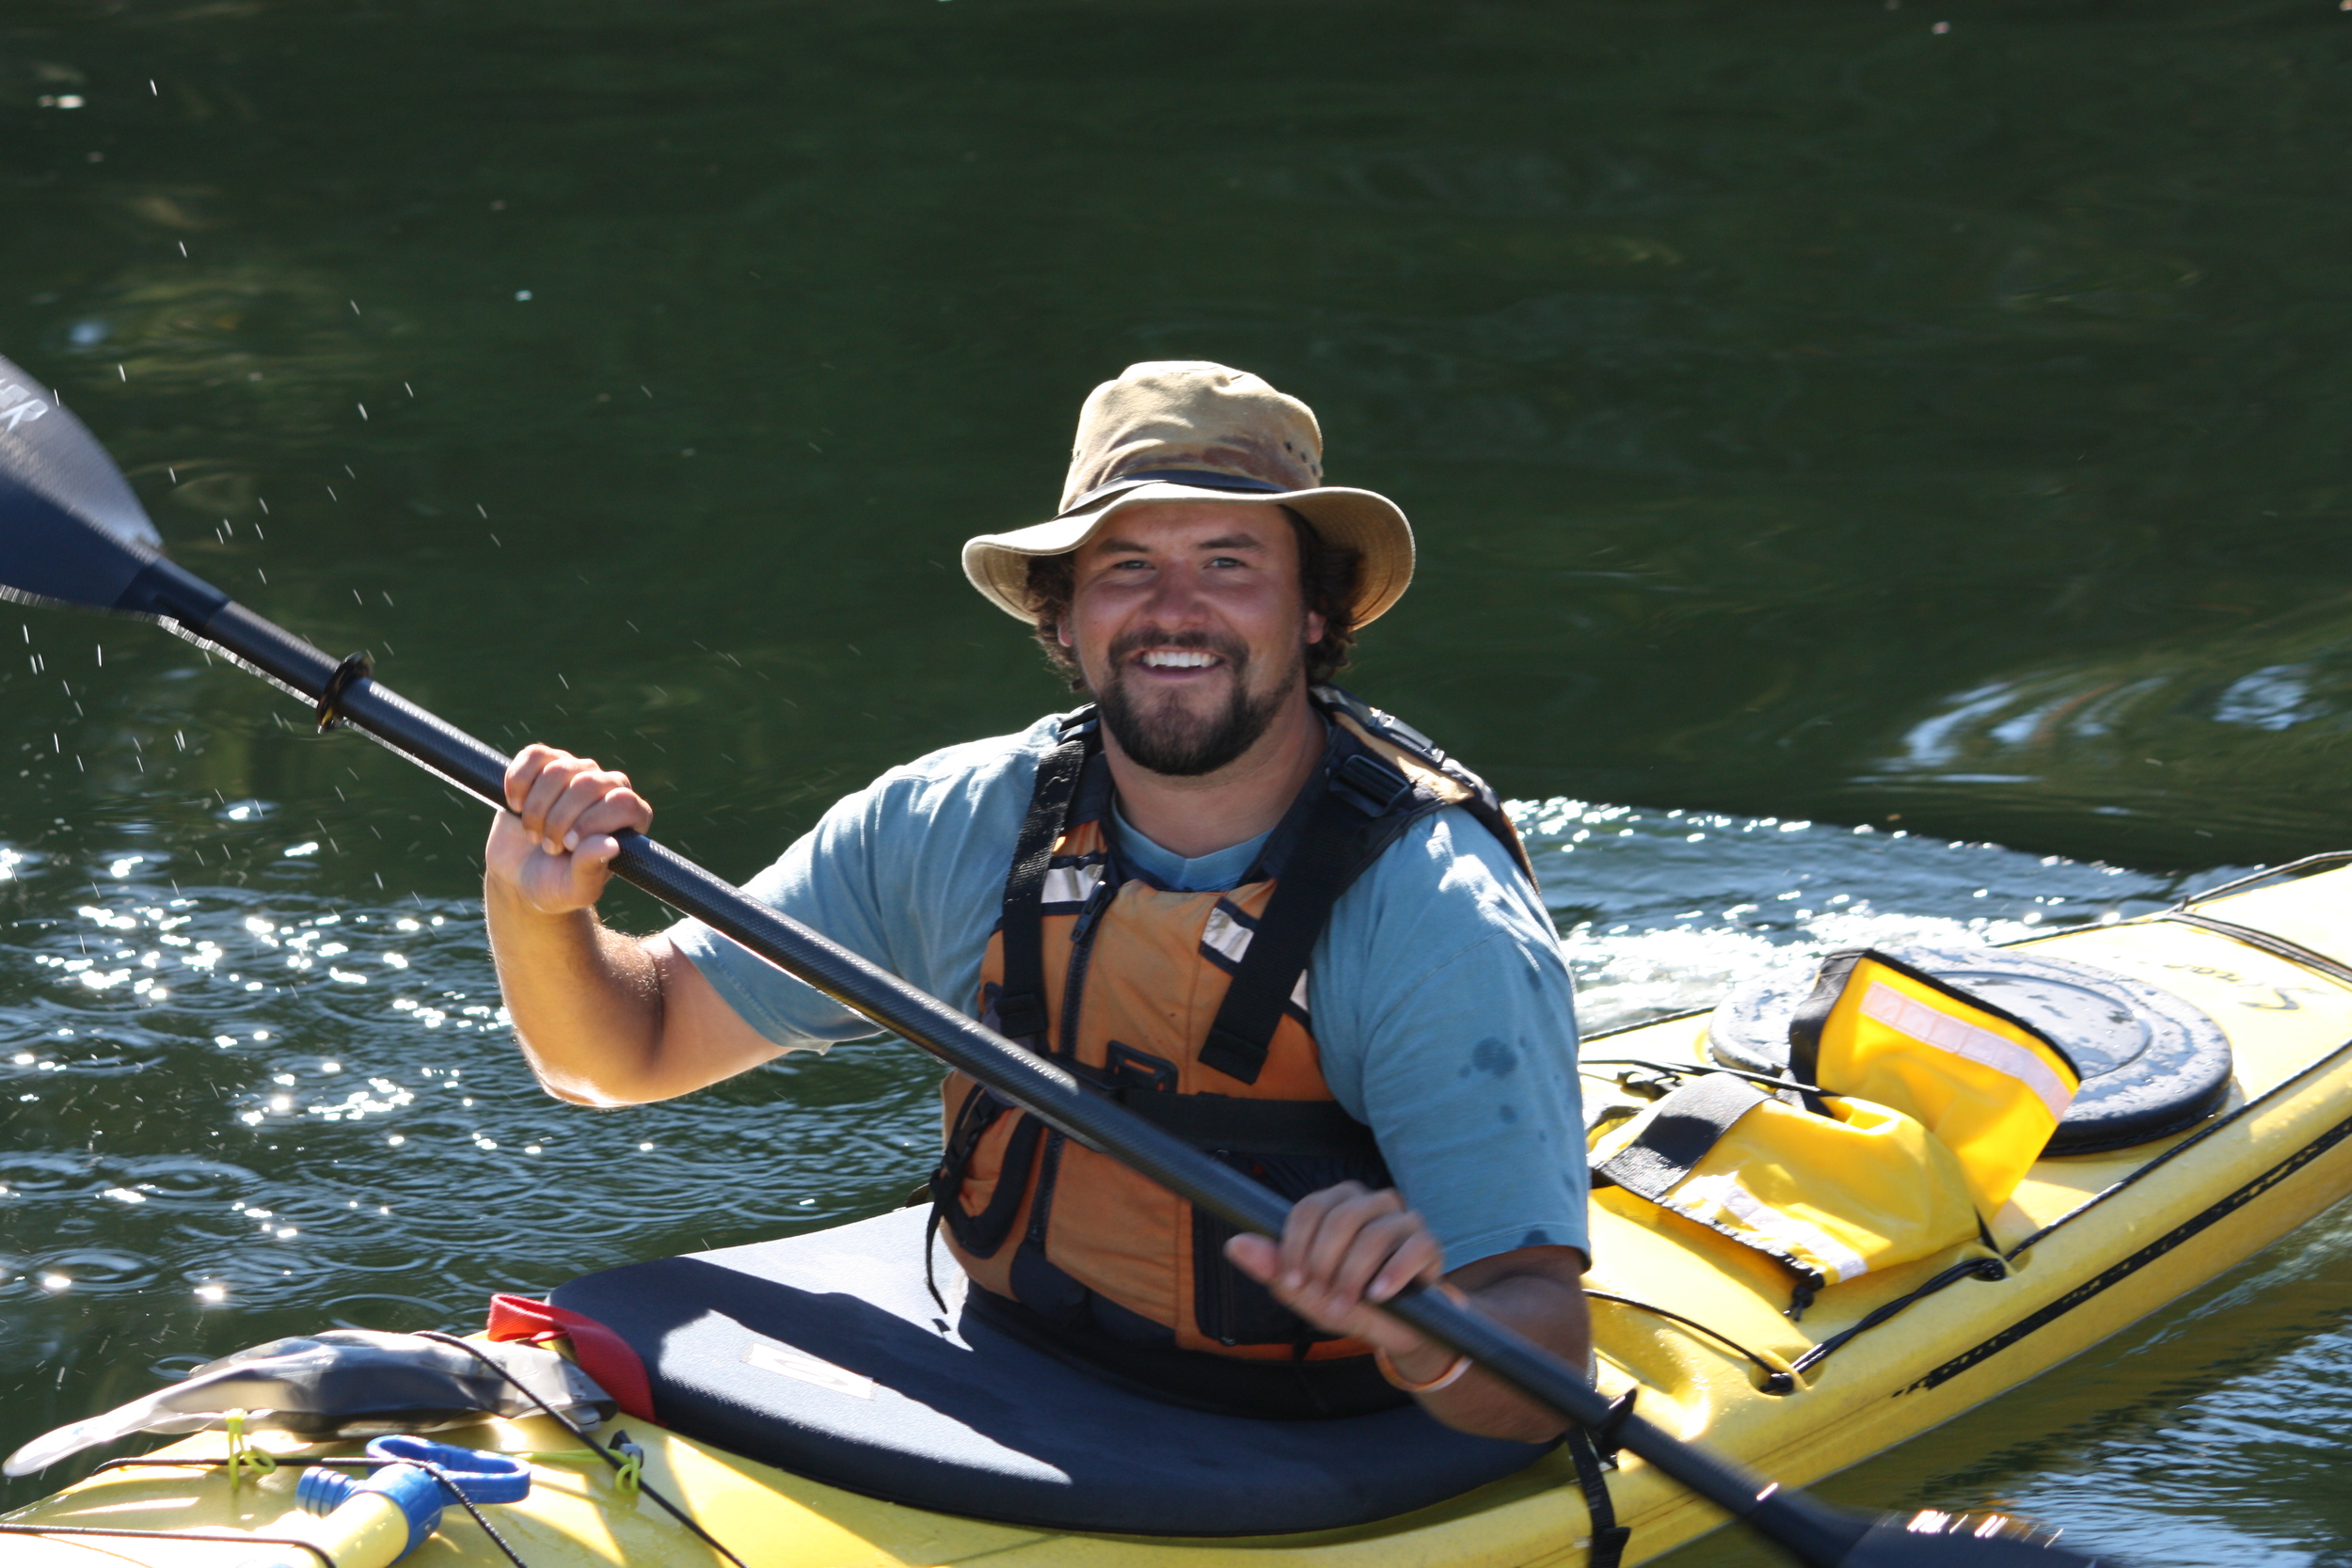  One of our all-time top rated guides, James White, is back this summer for his fifth year of paddling at Orcas Cove for Southeast Sea Kayaks. 